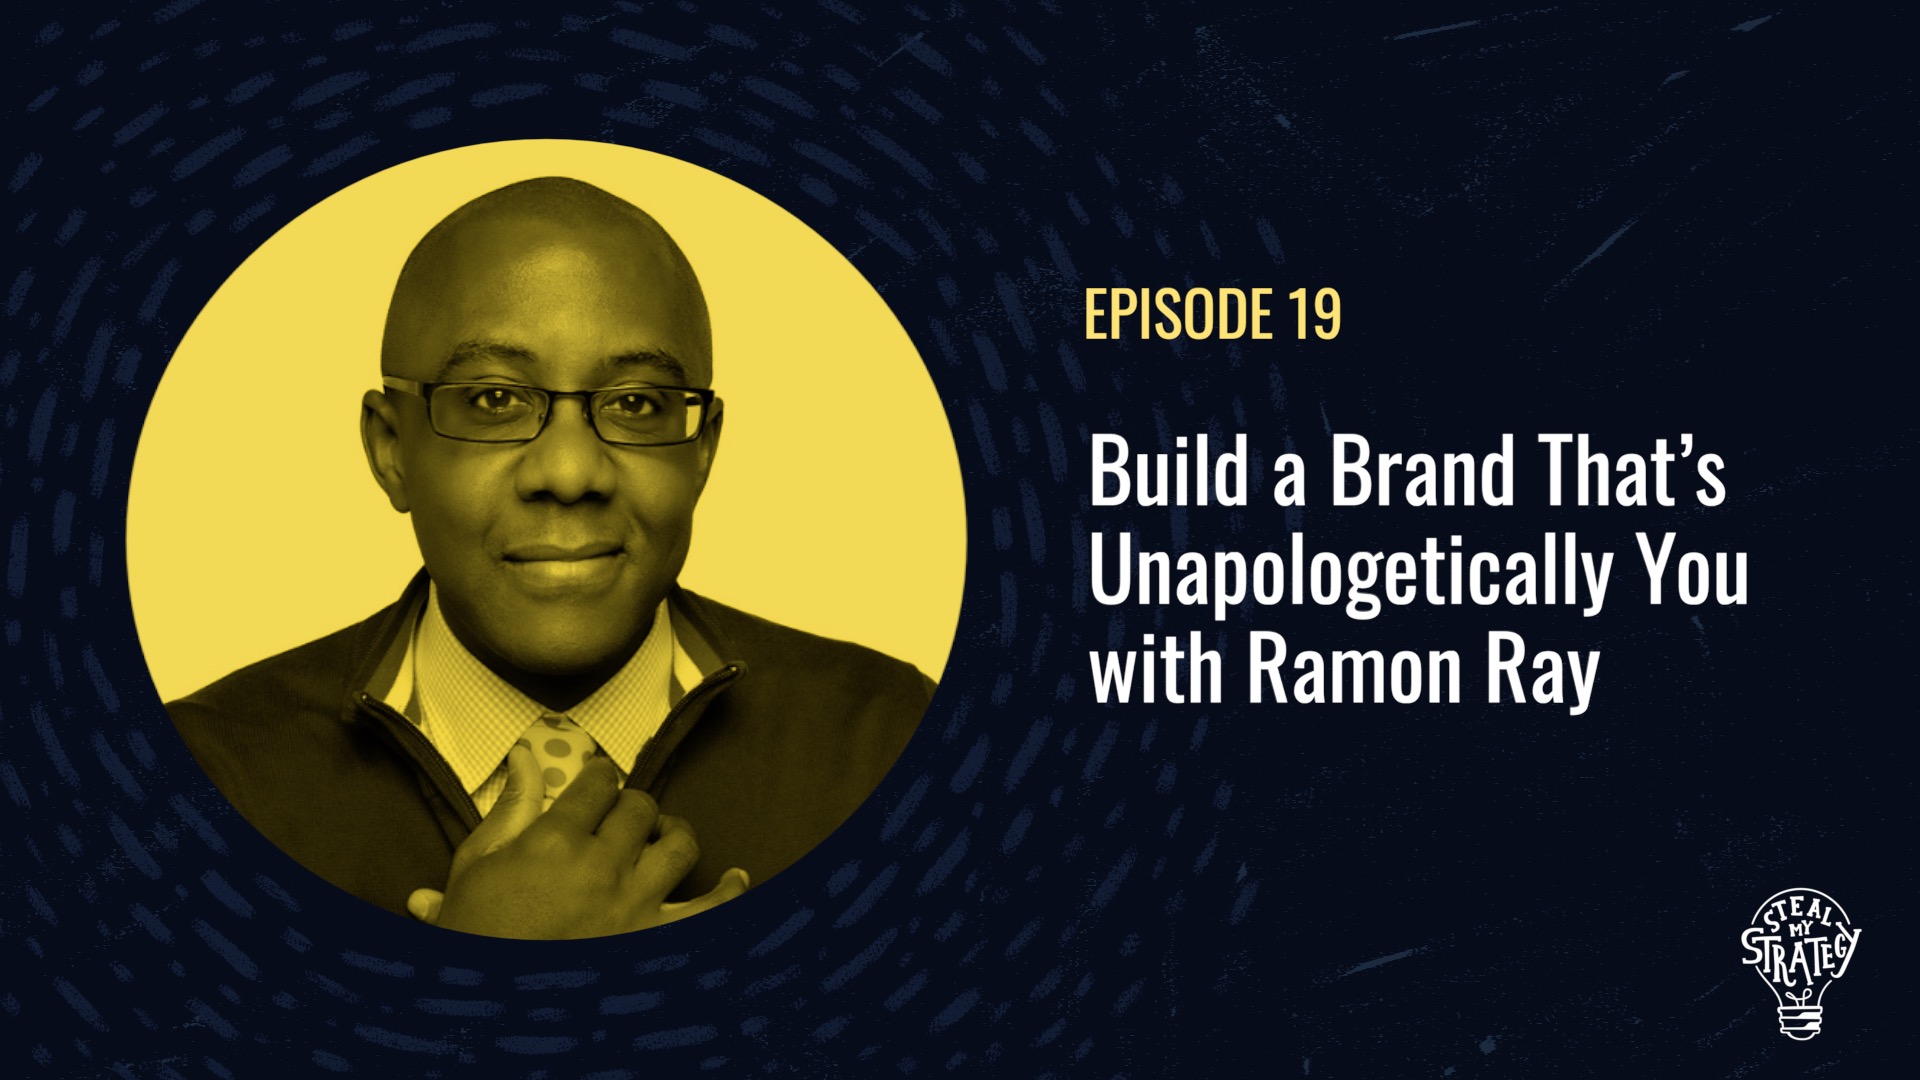 [Podcast] Steal My Strategy: Building a Brand That’s Unapologetically You with Ramon Ray